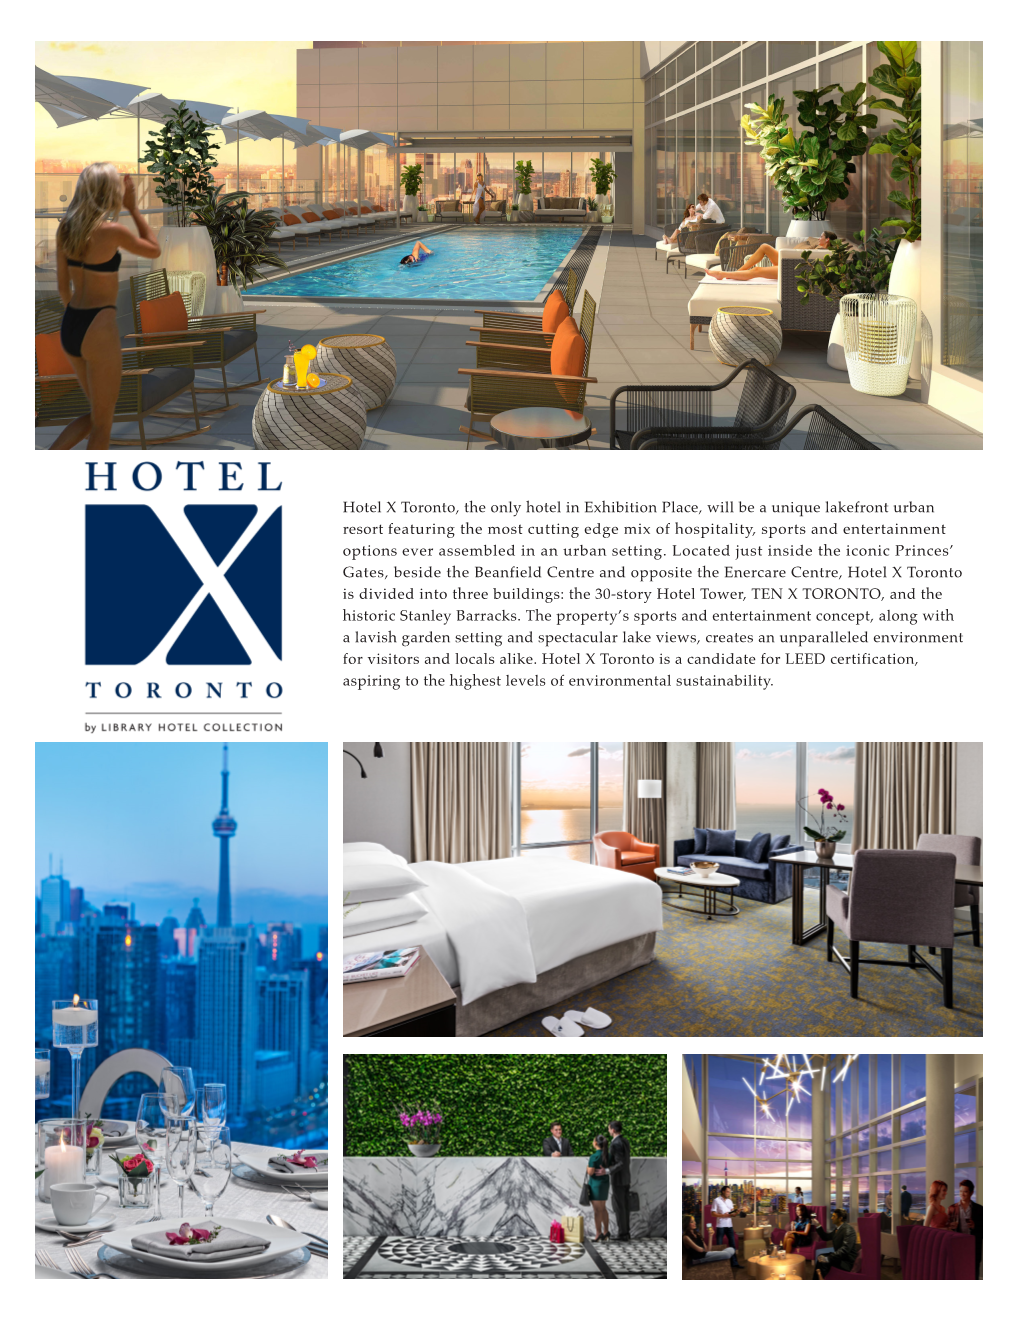 Hotel X Toronto, the Only Hotel in Exhibition Place, Will Be a Unique